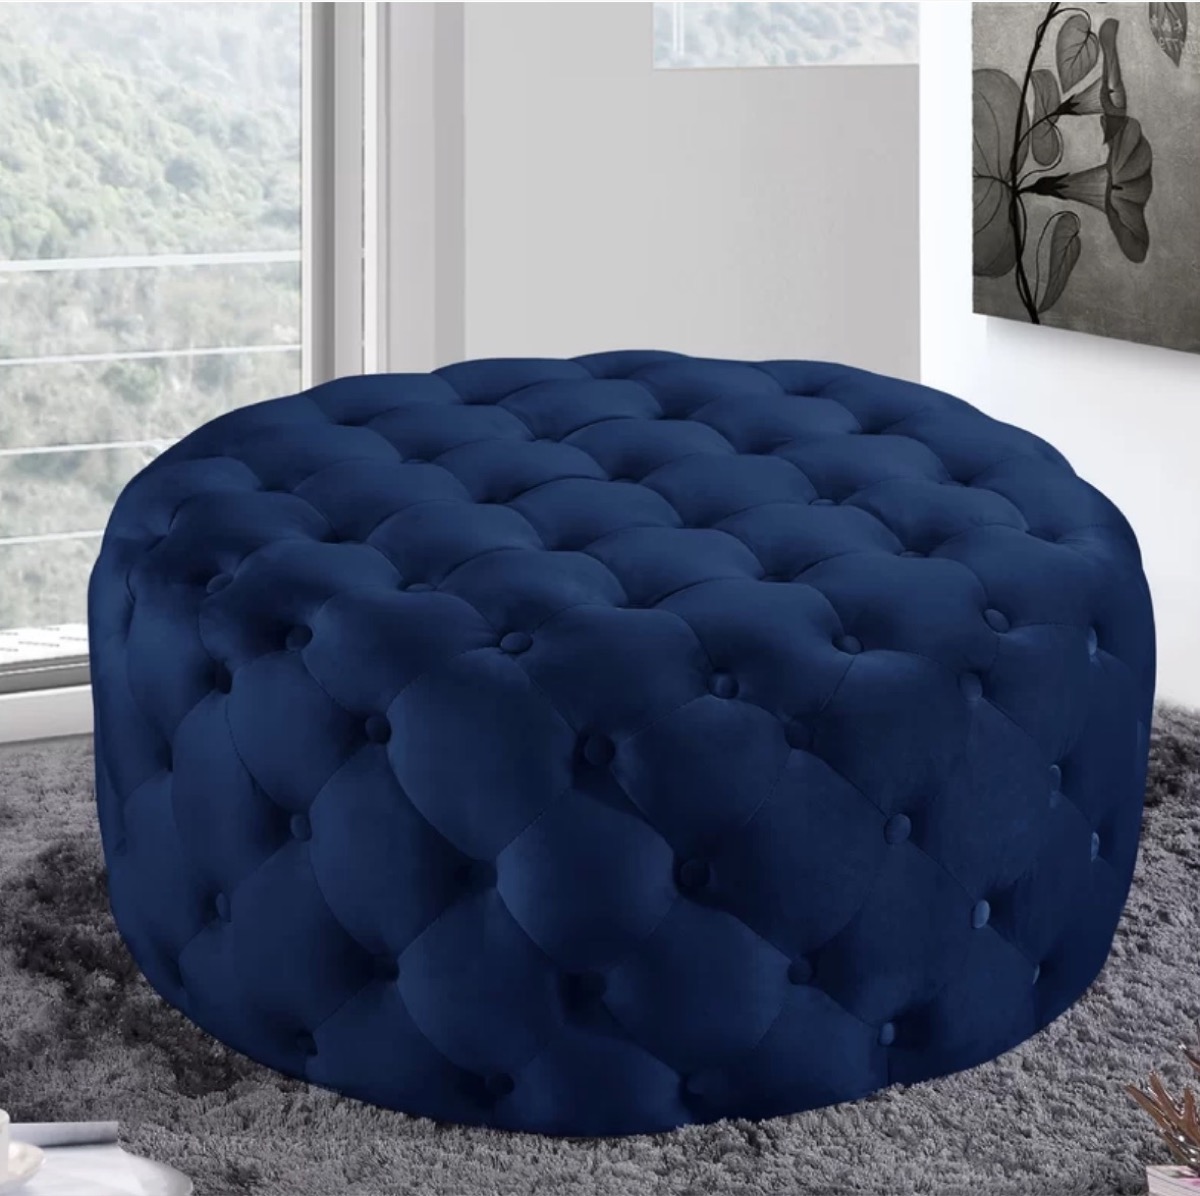 tufted blue ottoman, old fashioned home items